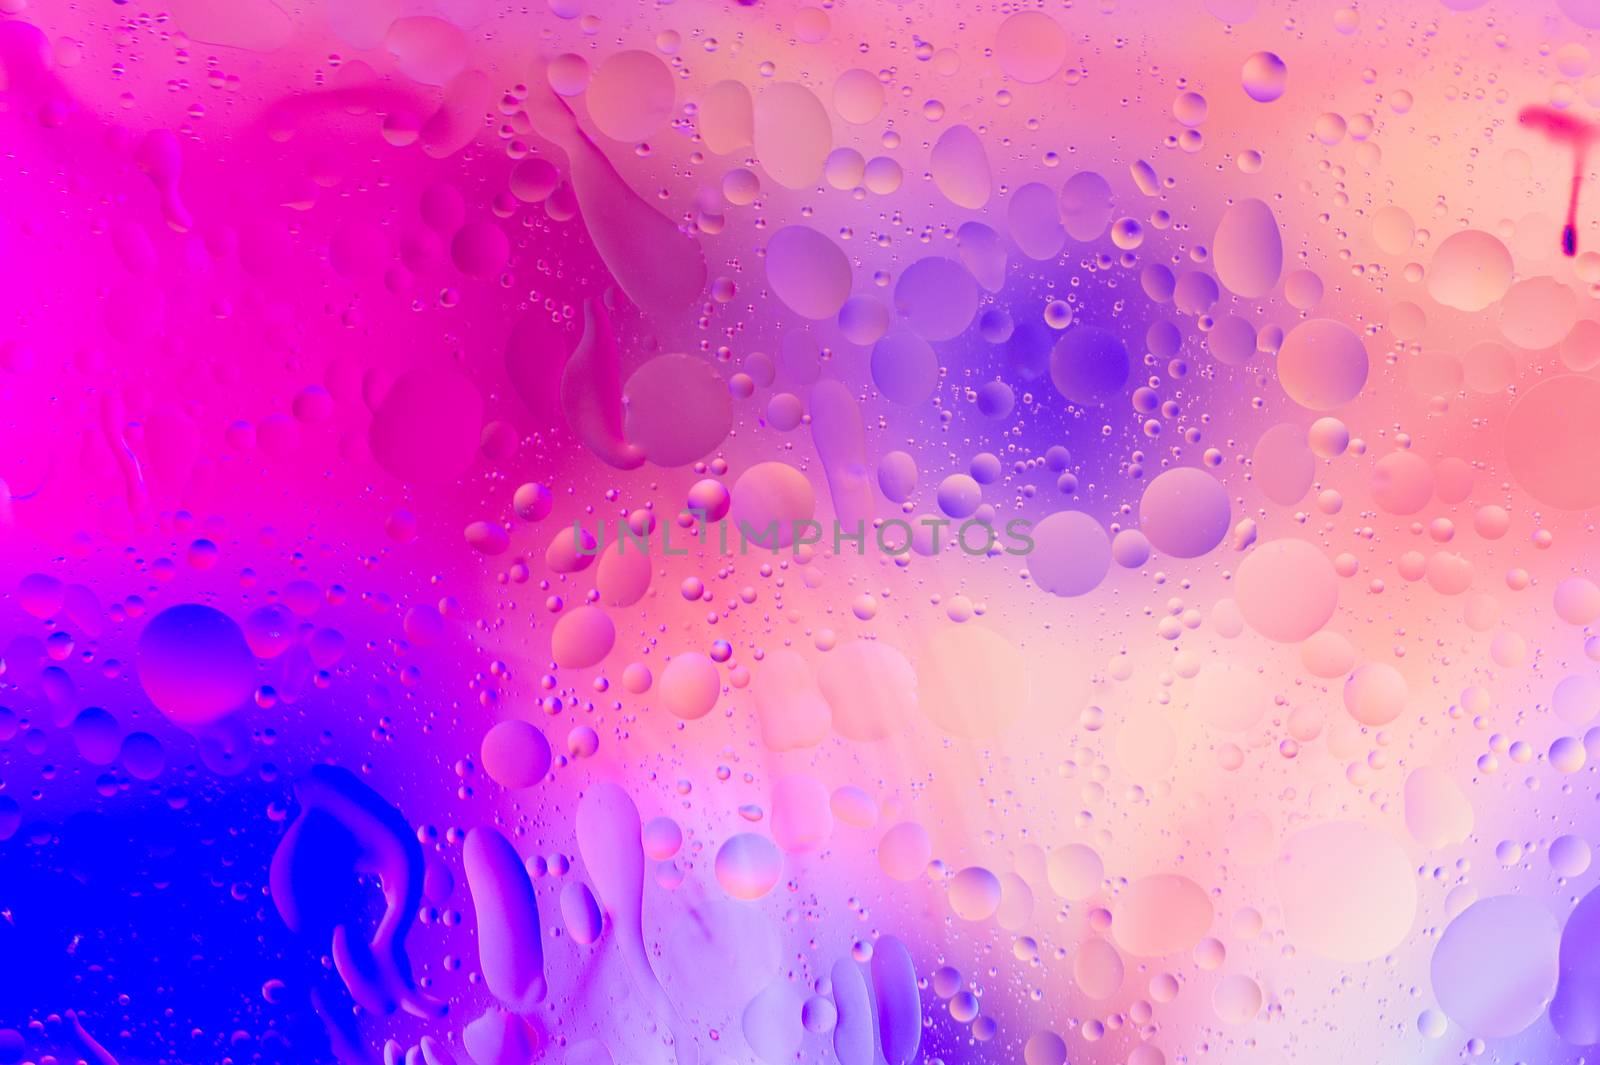 The purple abstract composition with oil drops in water with soft focus effect.